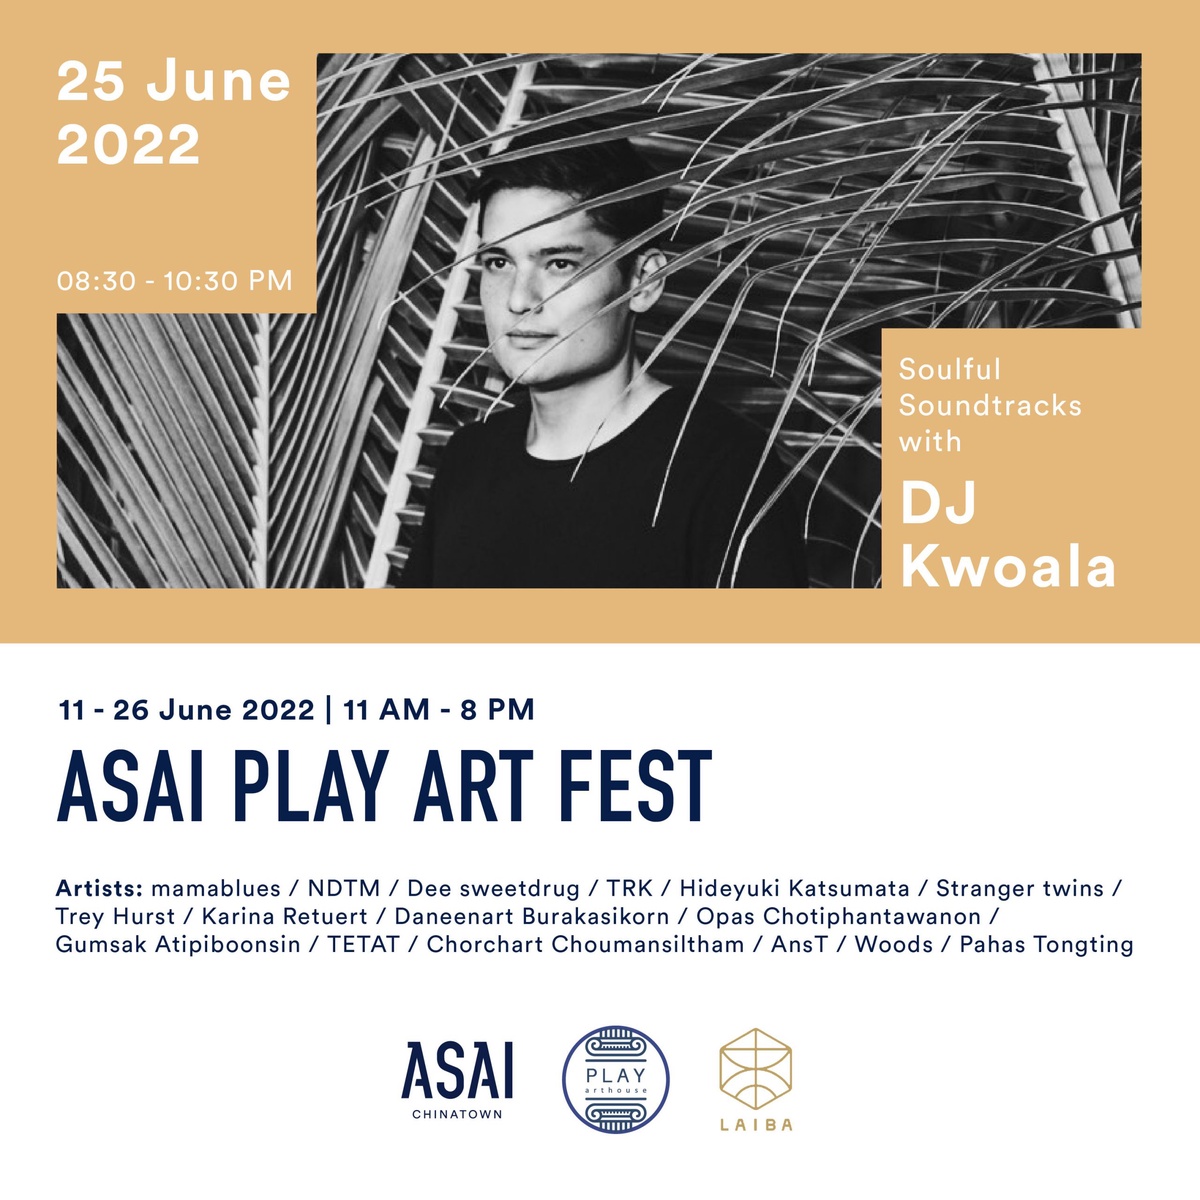 ASAI Bangkok Chinatown hotel transforms into interactive art gallery showcasing local and international talent over three vibrant weekends this June